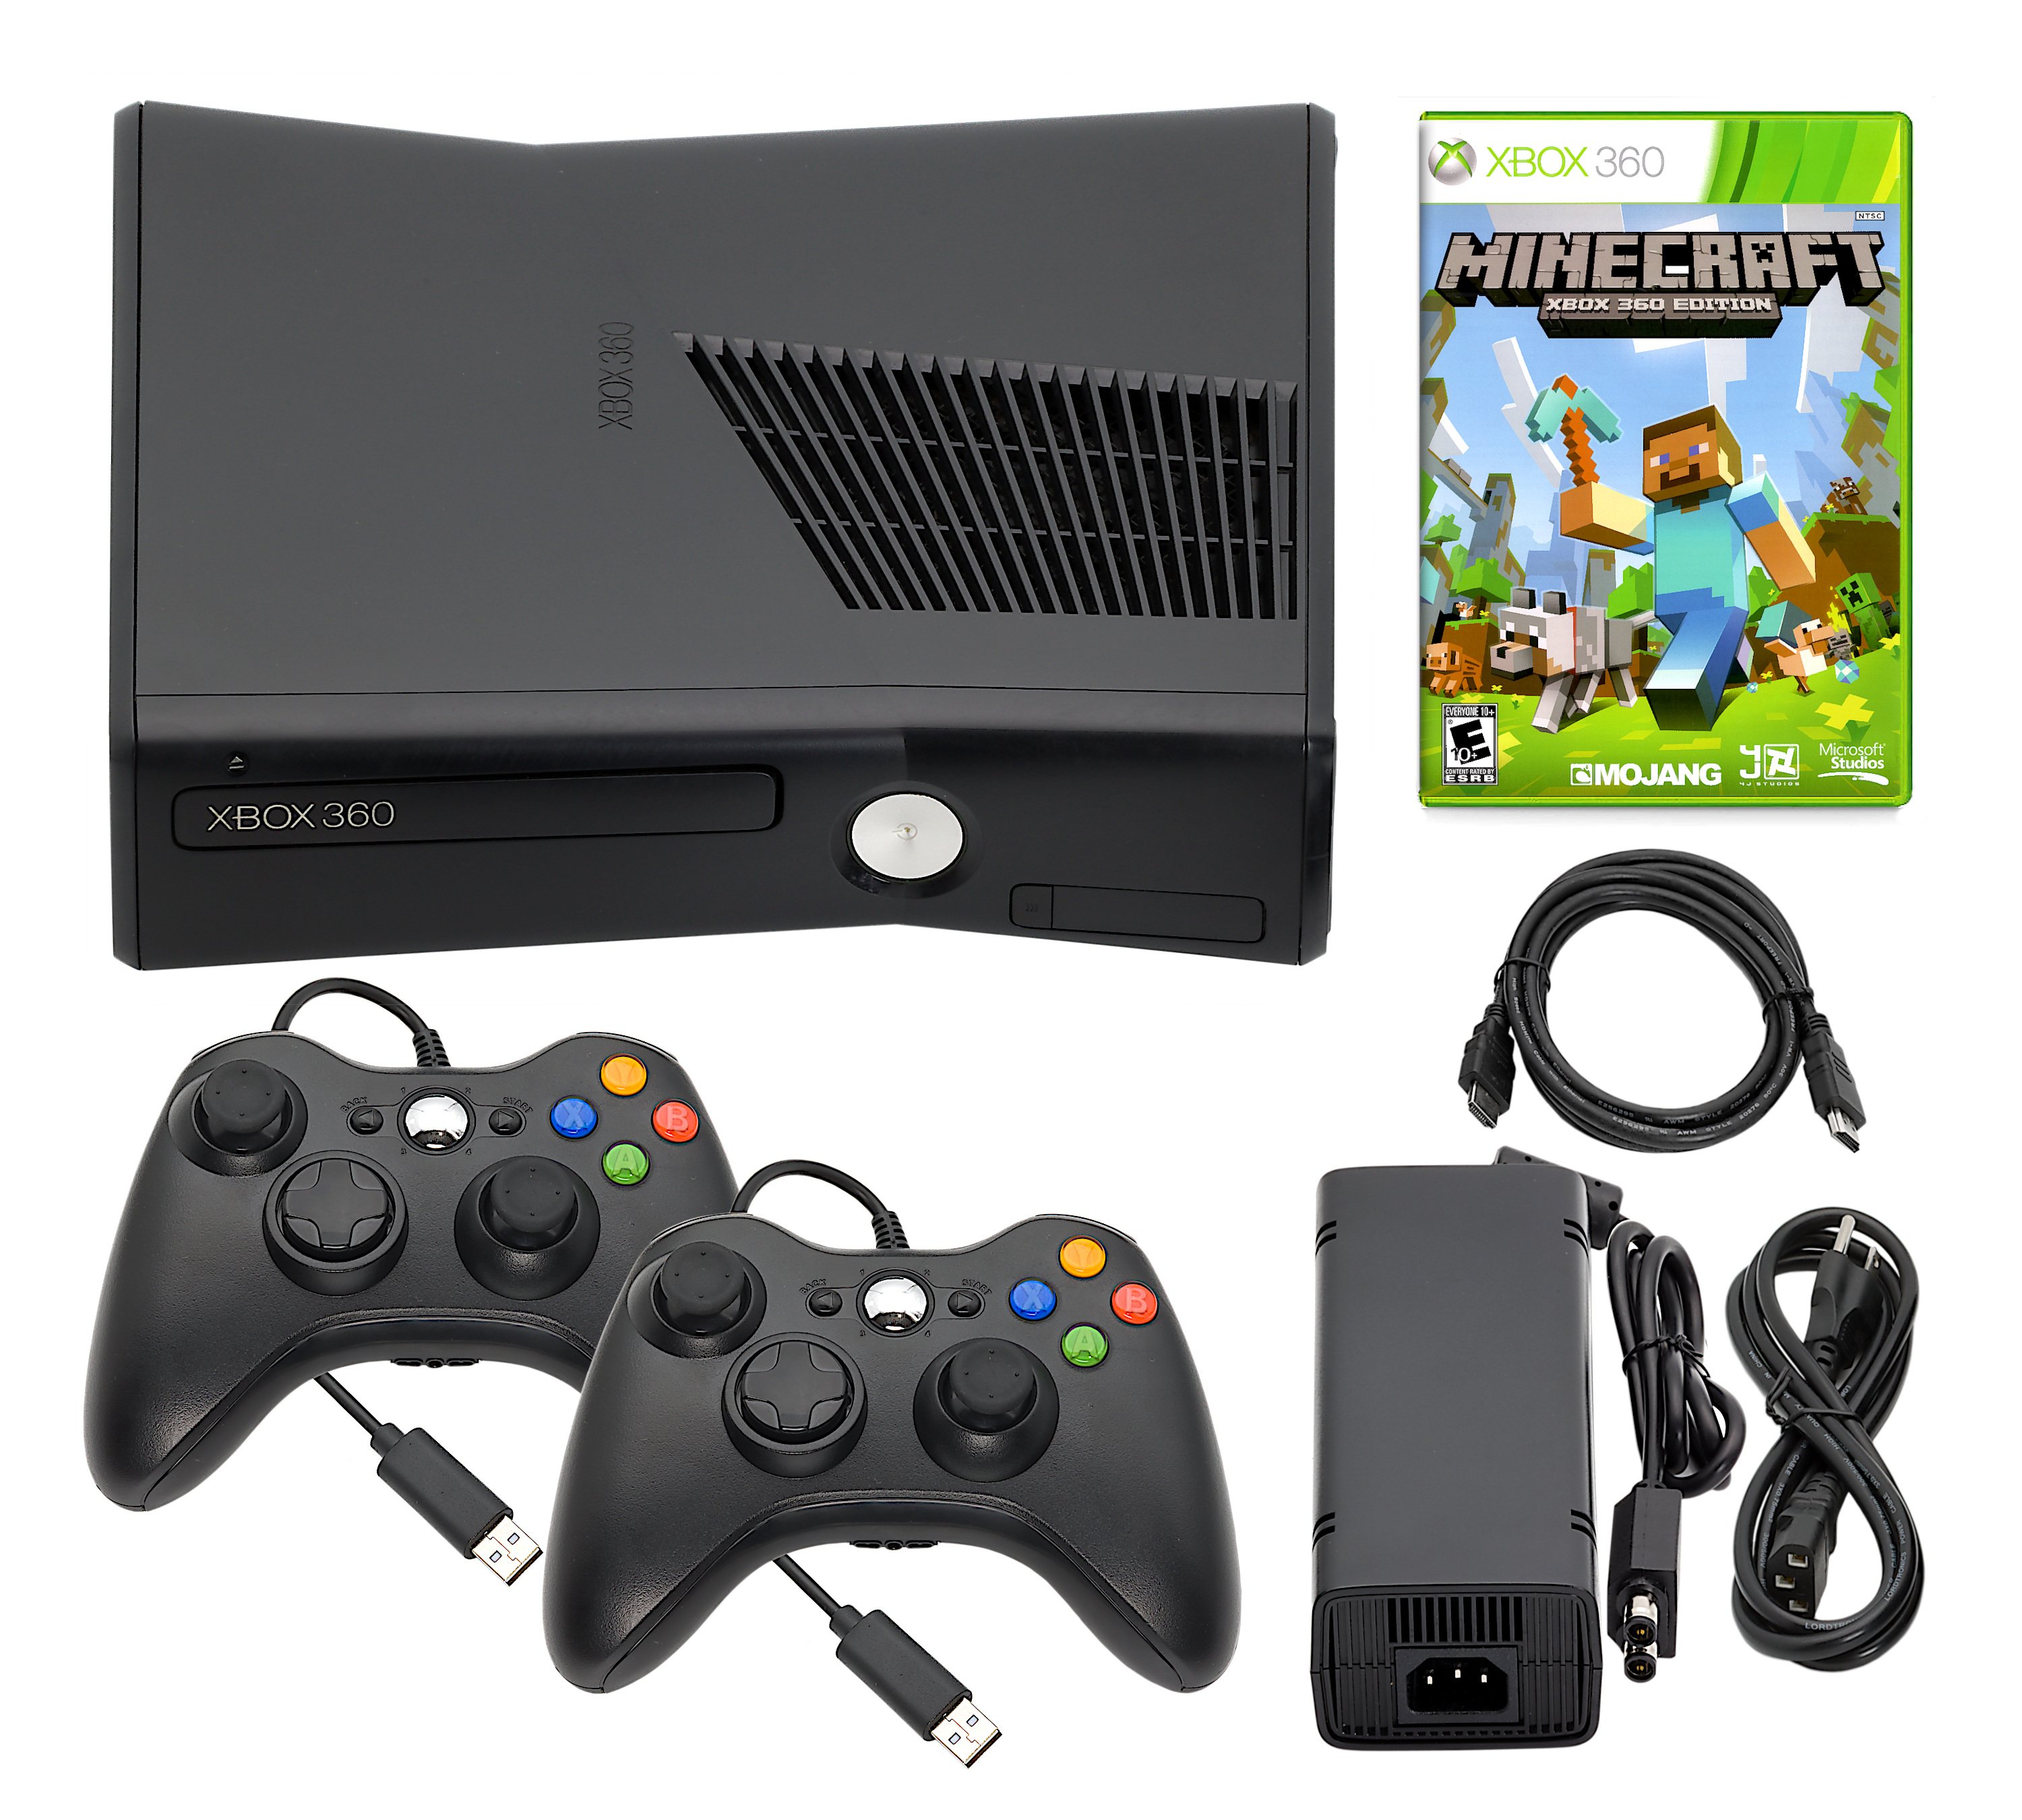 Guaranteed Xbox 360 Console S / Slim + Your choice: Minecraft or No Game + Choose storage: 4GB, 250GB or 500GB + US Seller